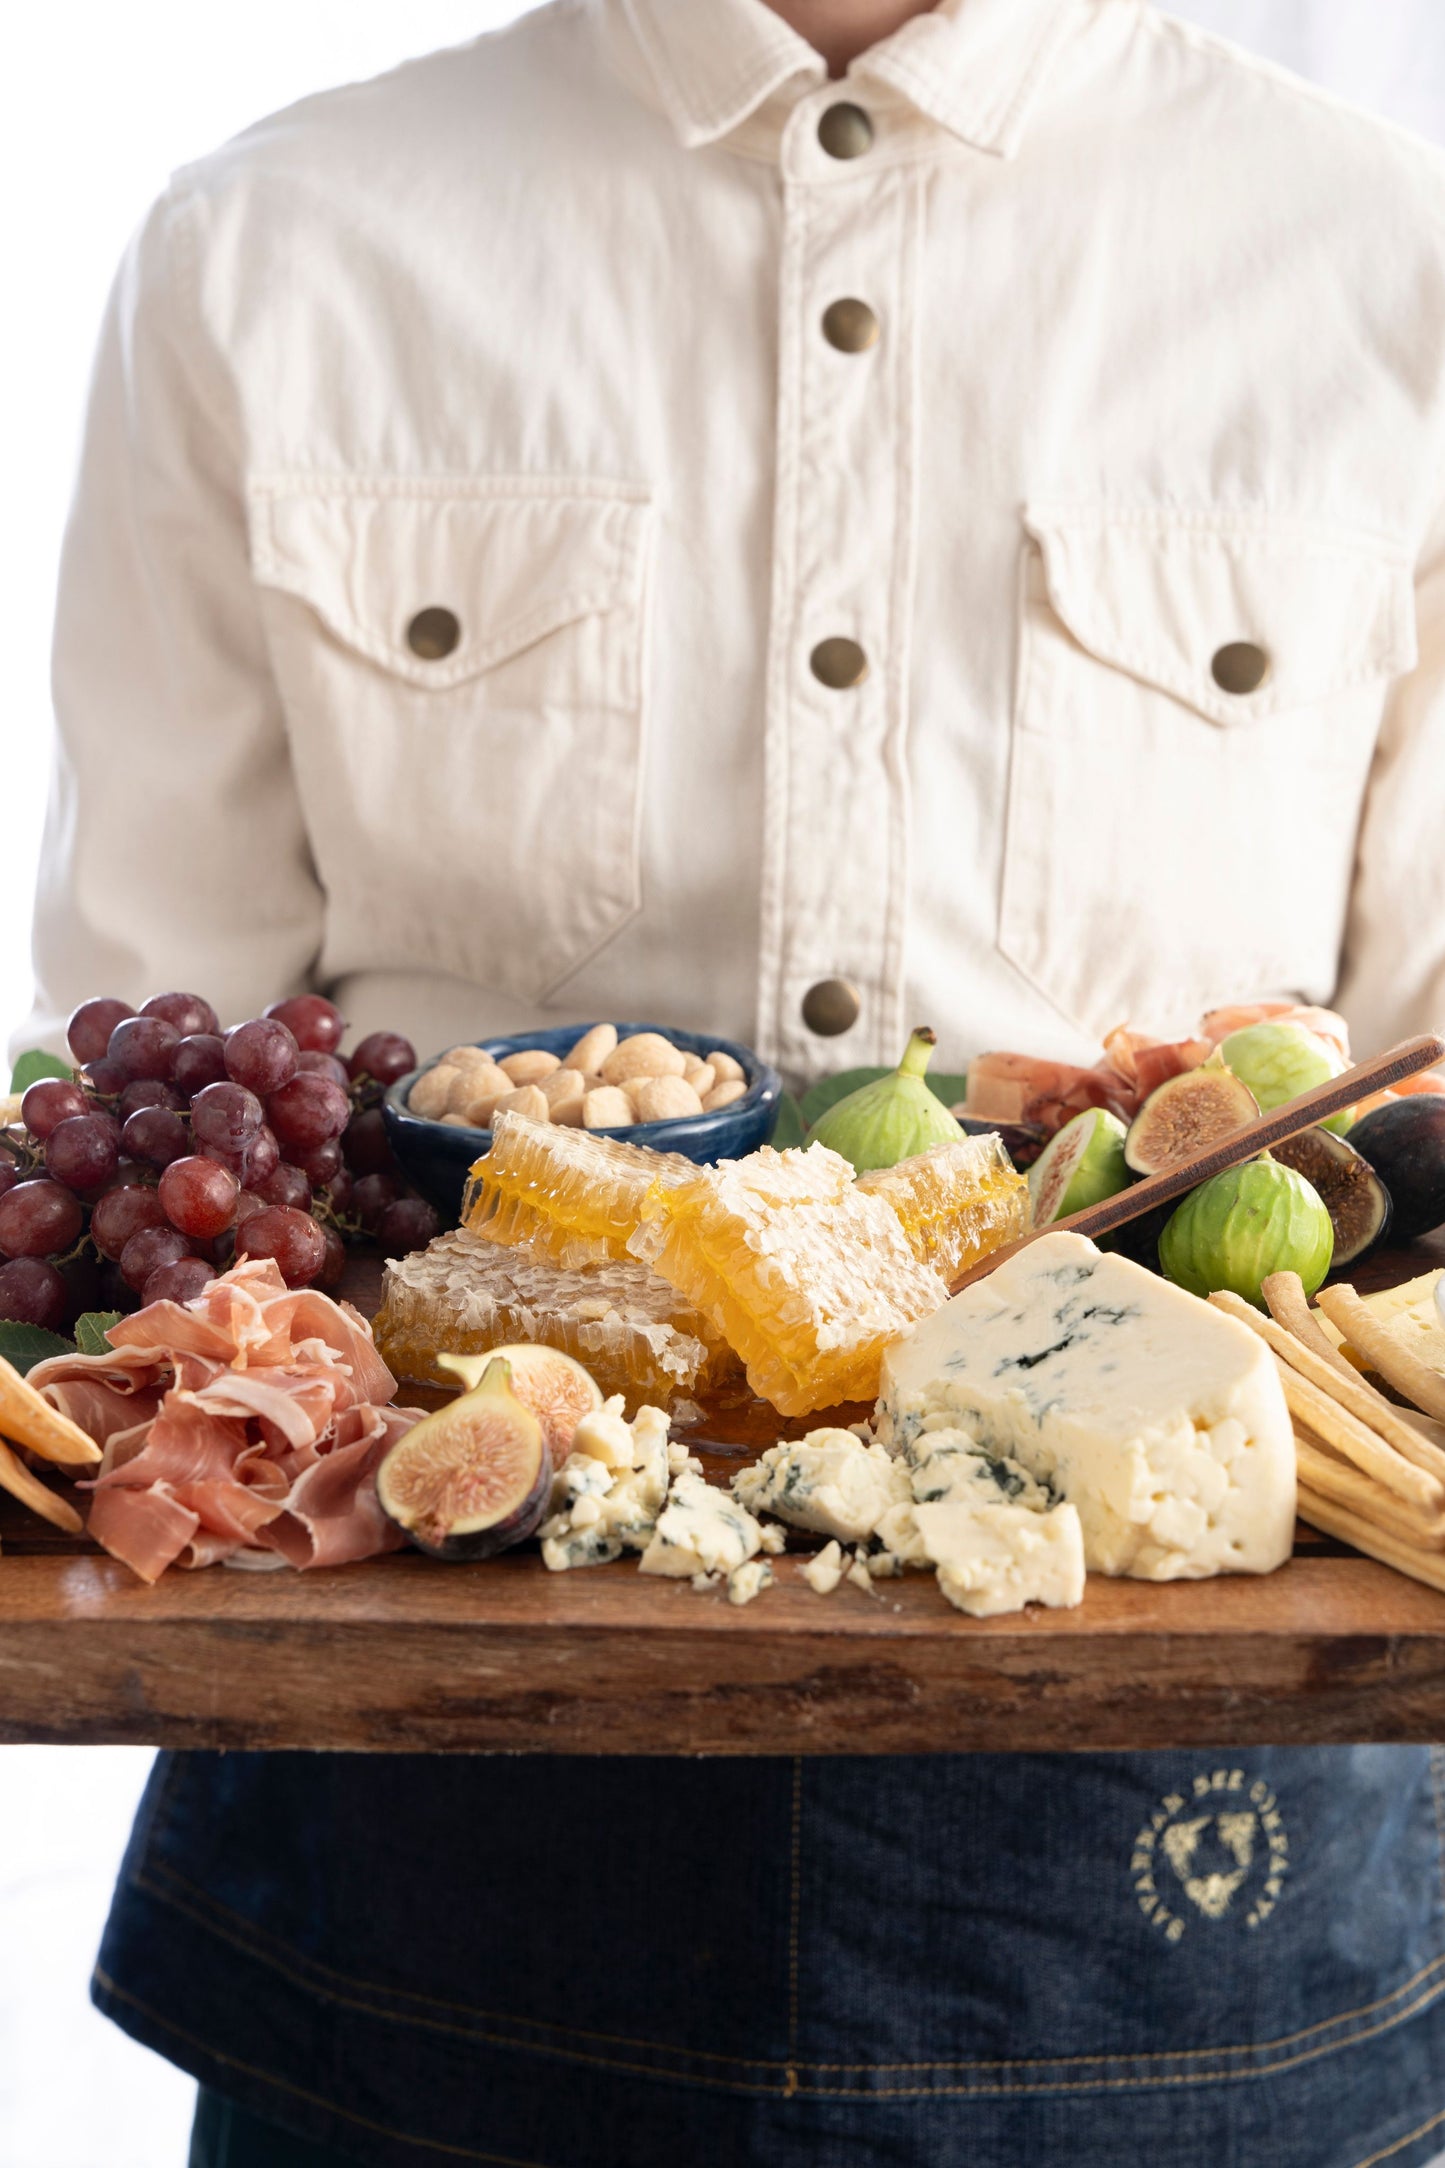 Cheese board held by someone, featuring grapes, nuts, blue cheese, figs, cured meats, and honeycomb.